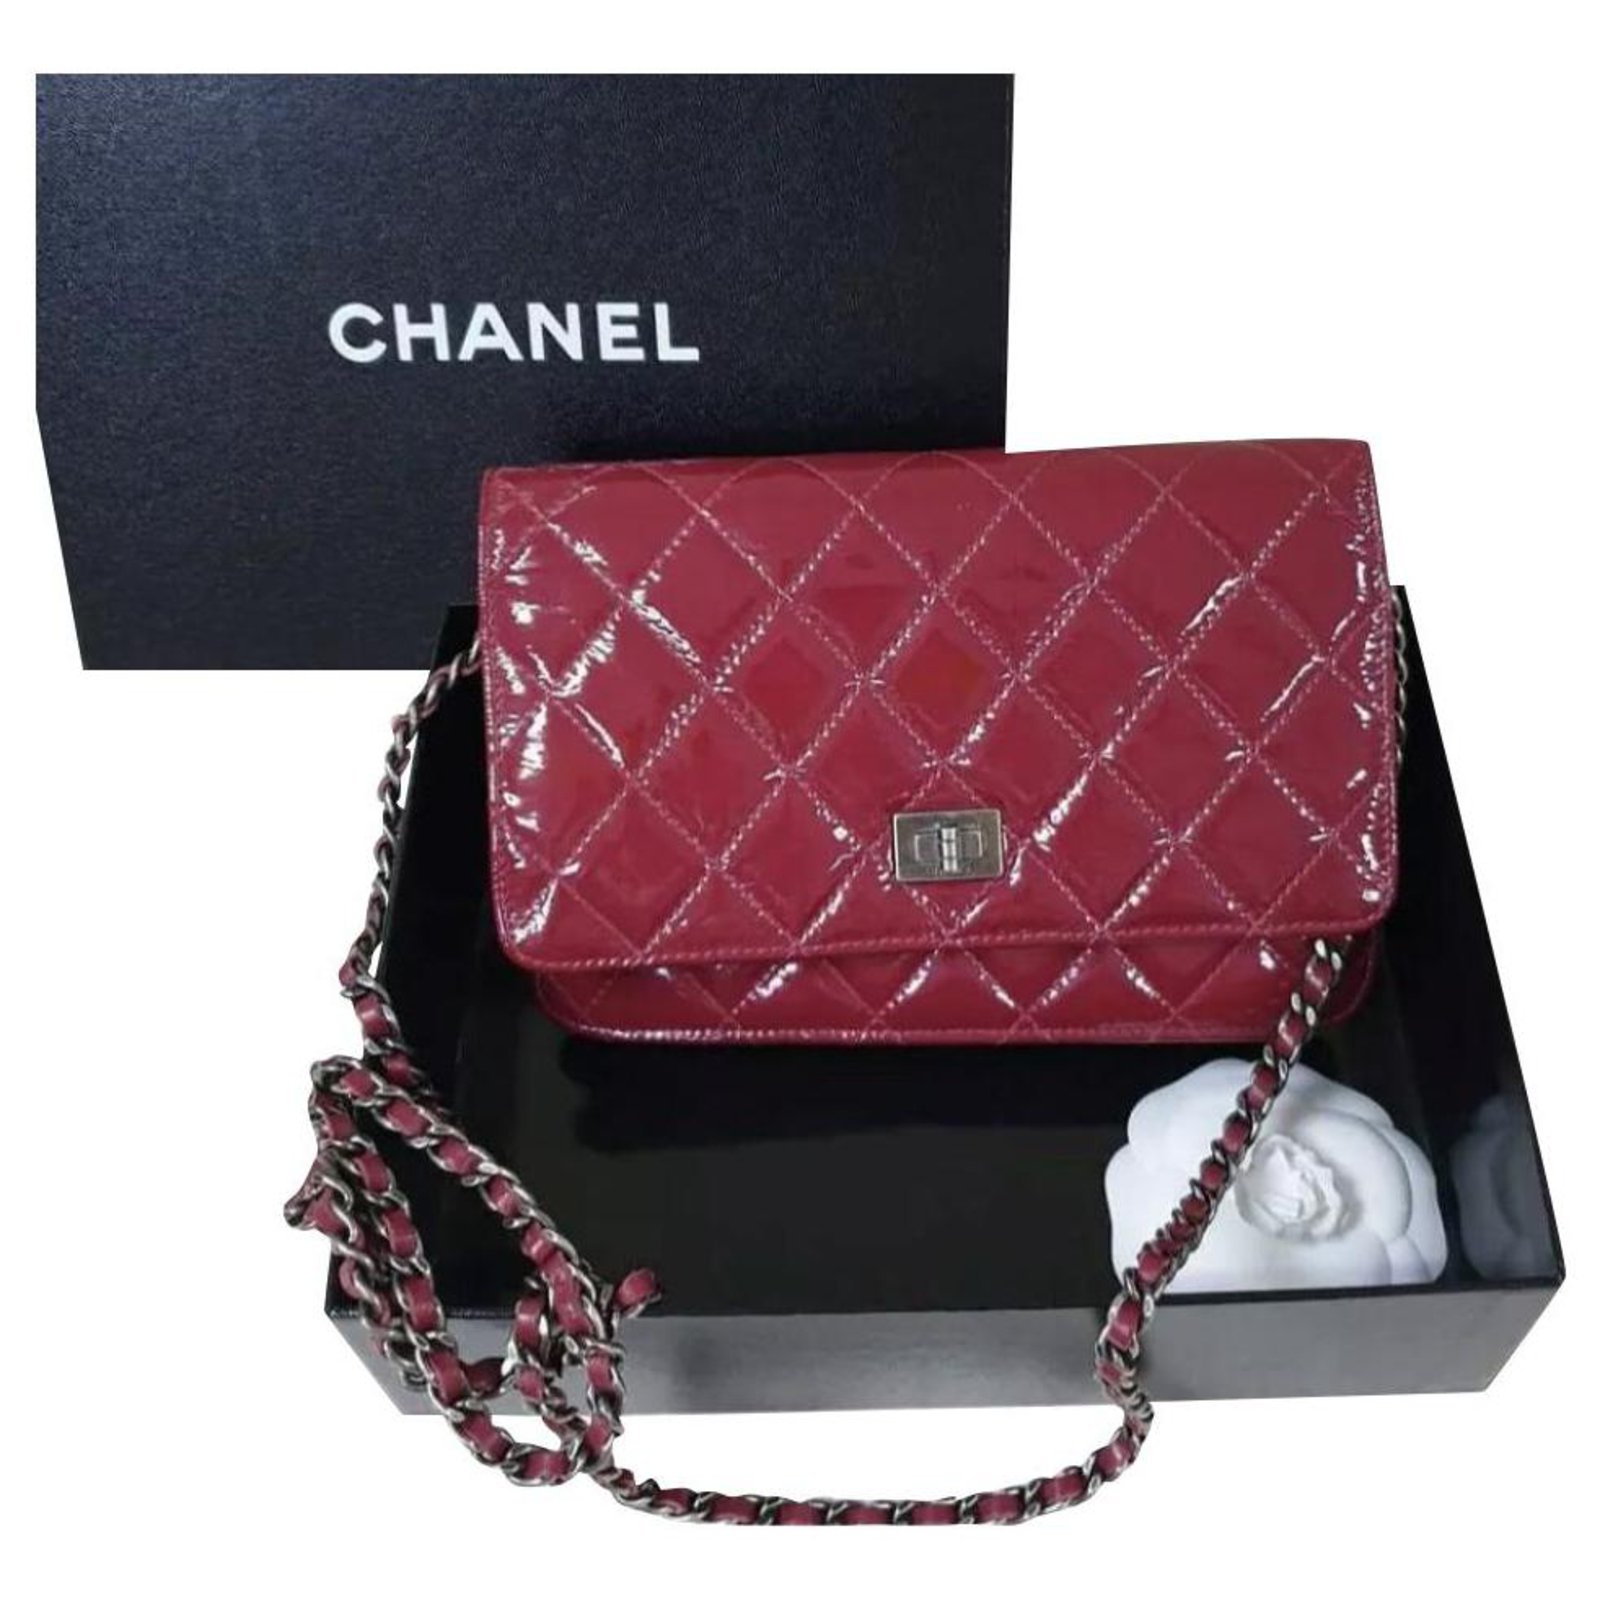 Chanel 2.55 Reissue WOC Red Patent Leather Bag Dark red ref.211313